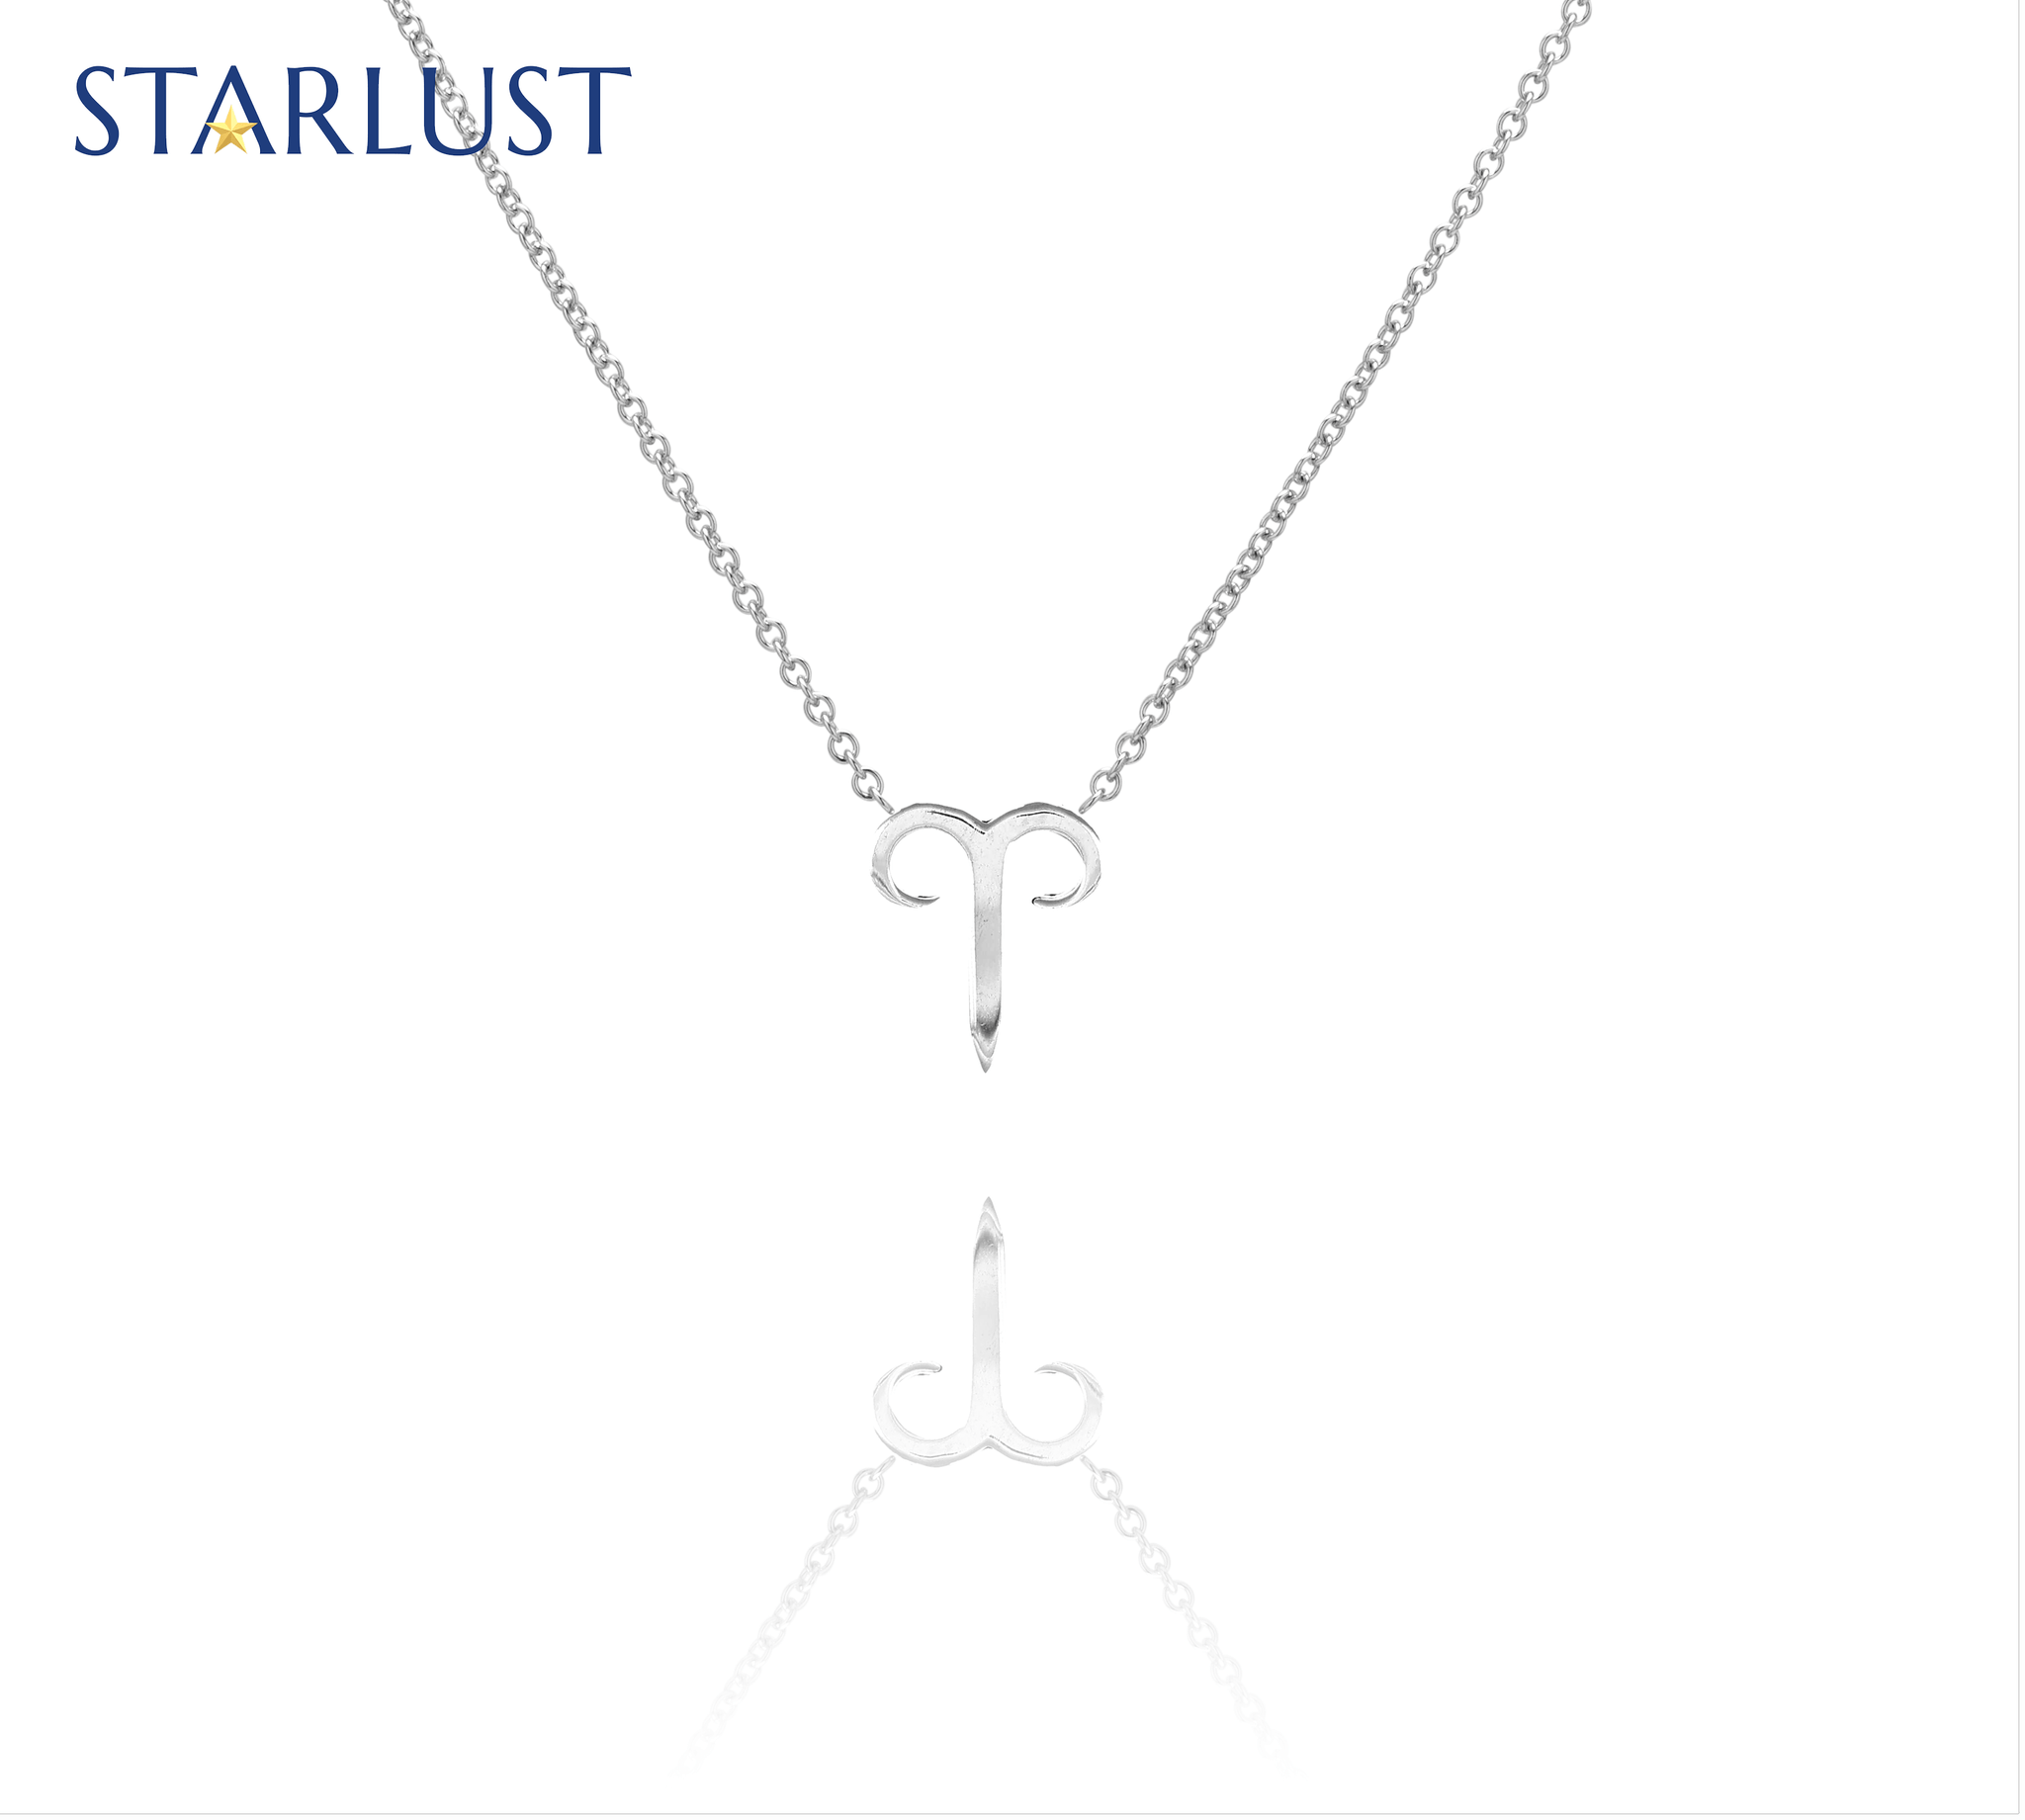 Aries Necklace Sterling Silver Starlust